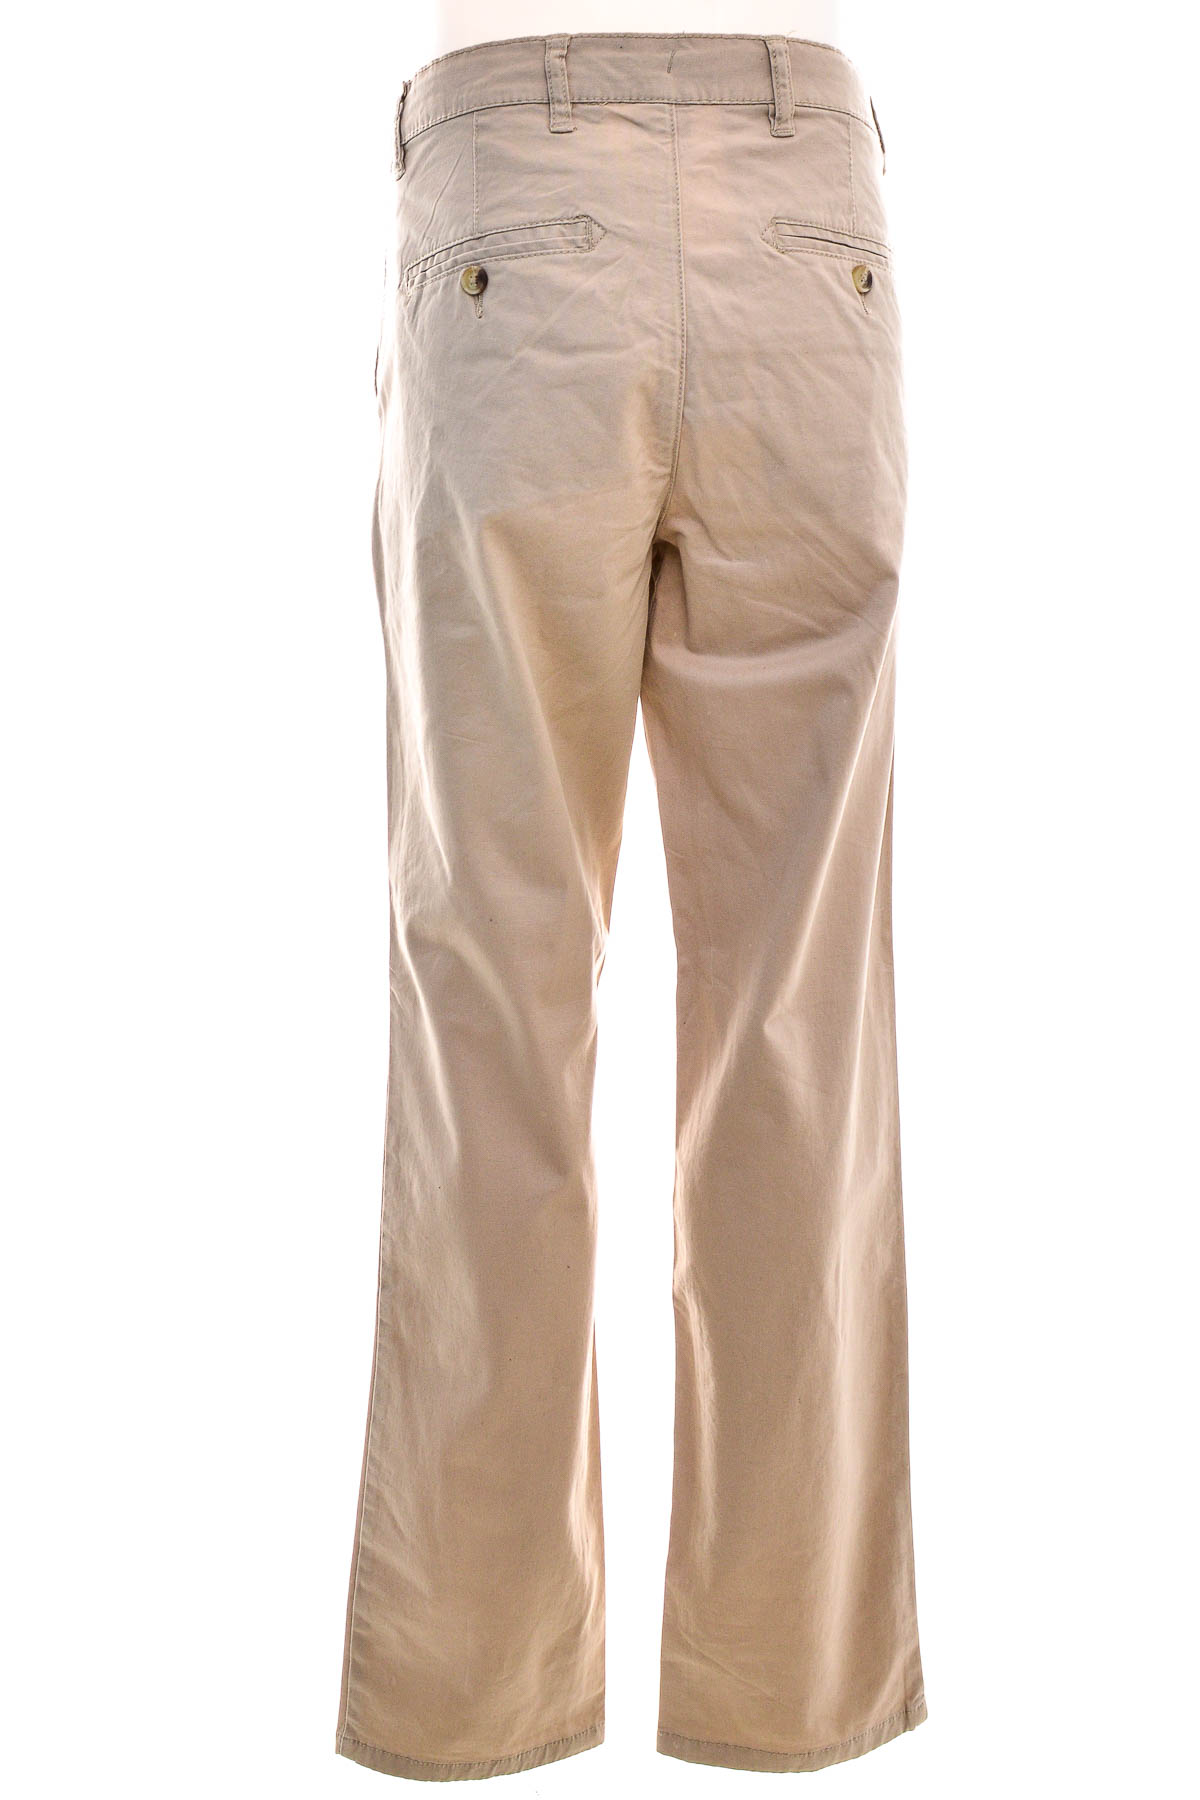 Men's trousers - Straight Up - 1